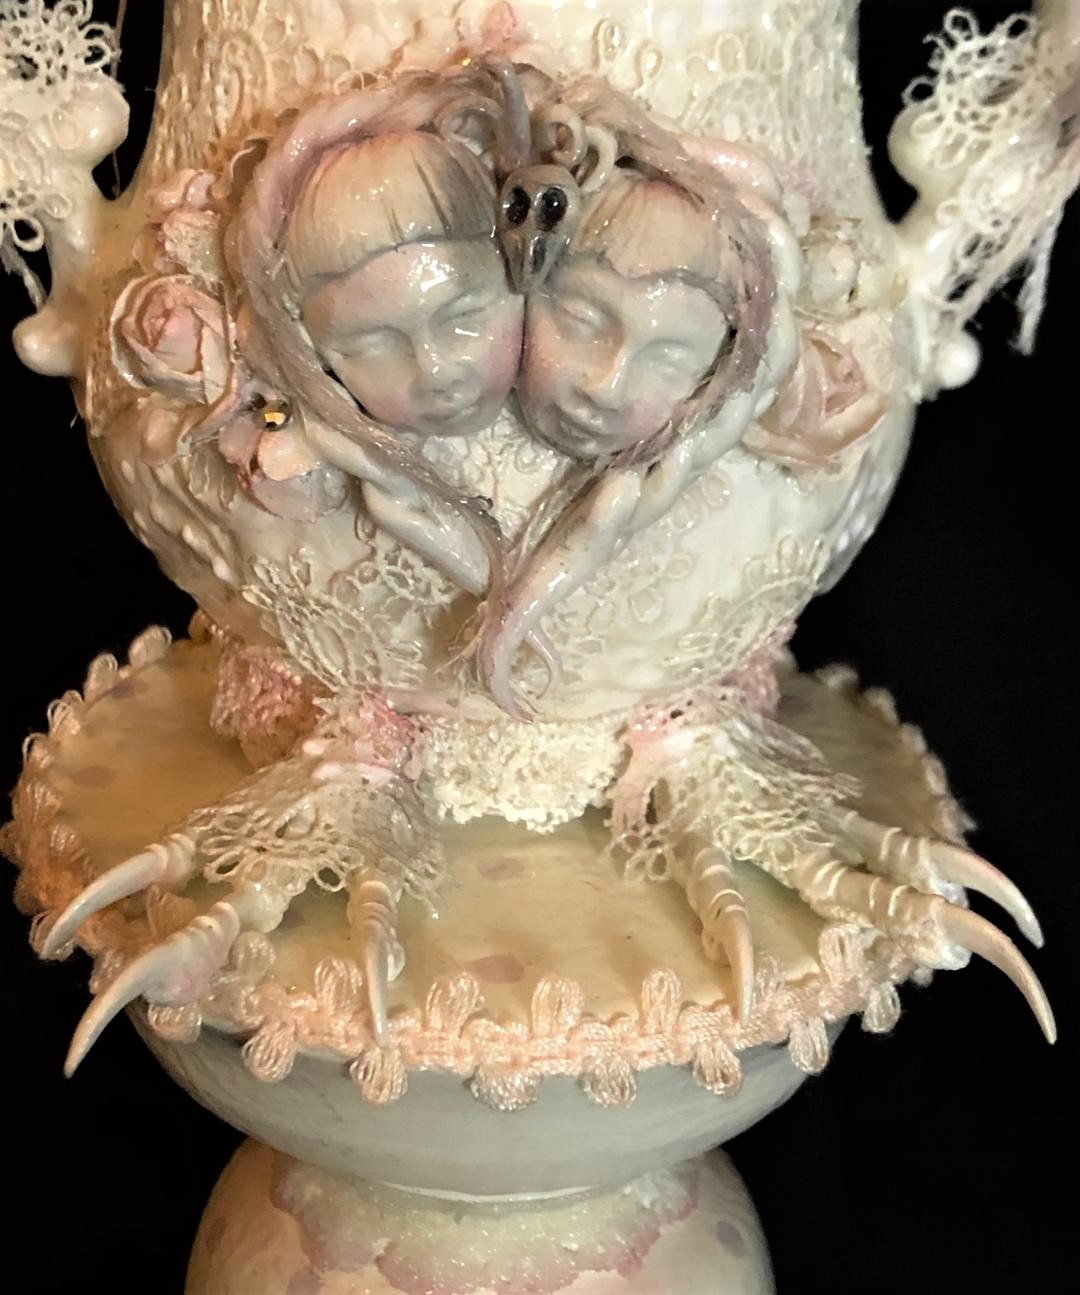 white rococo baroque mixed media assemblage vase with two faces and bird feet on pedestal